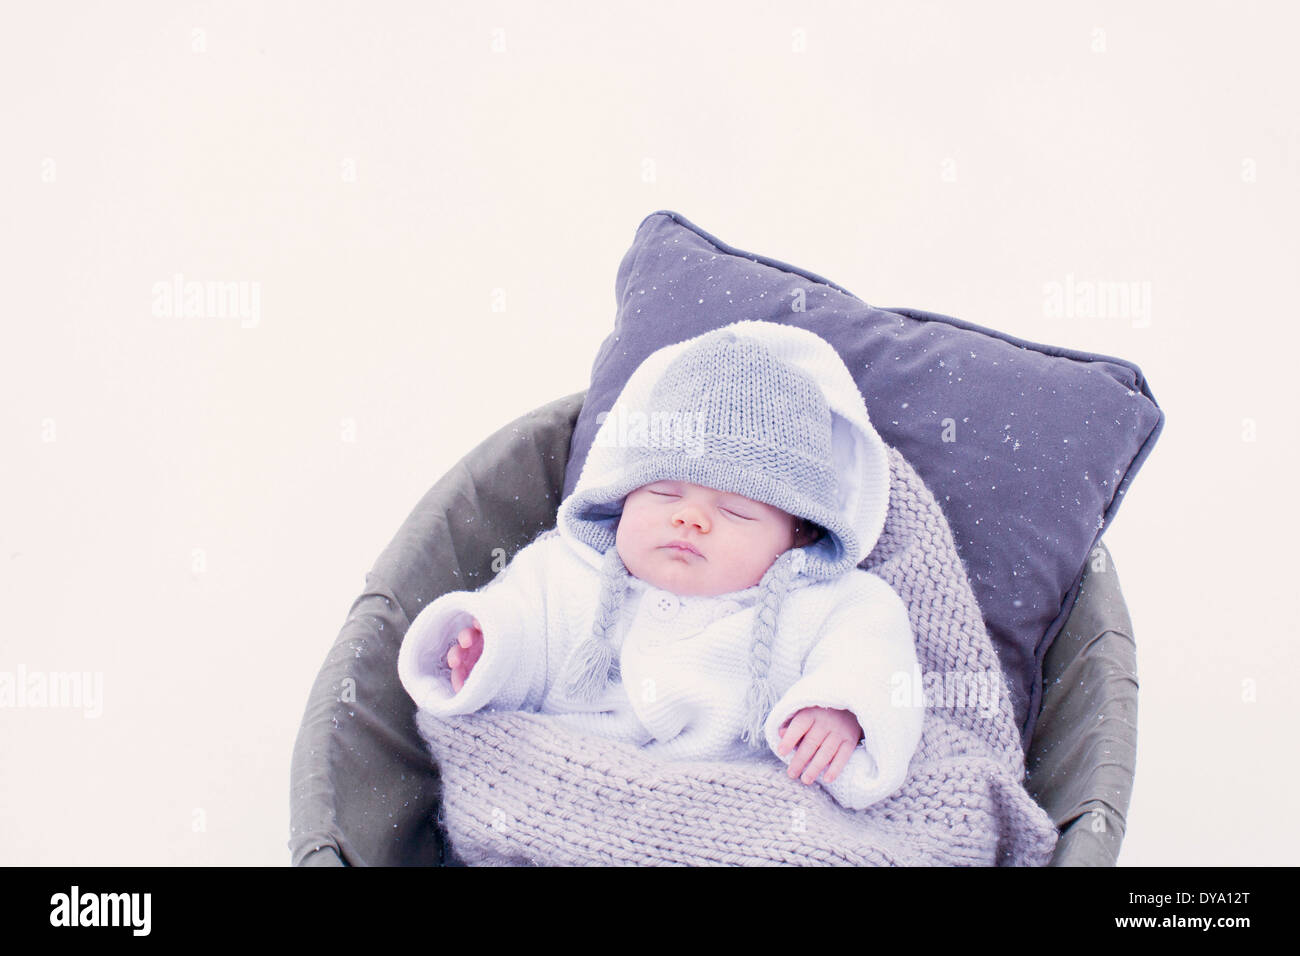 Baby sleeping in bassinet in snow Banque D'Images